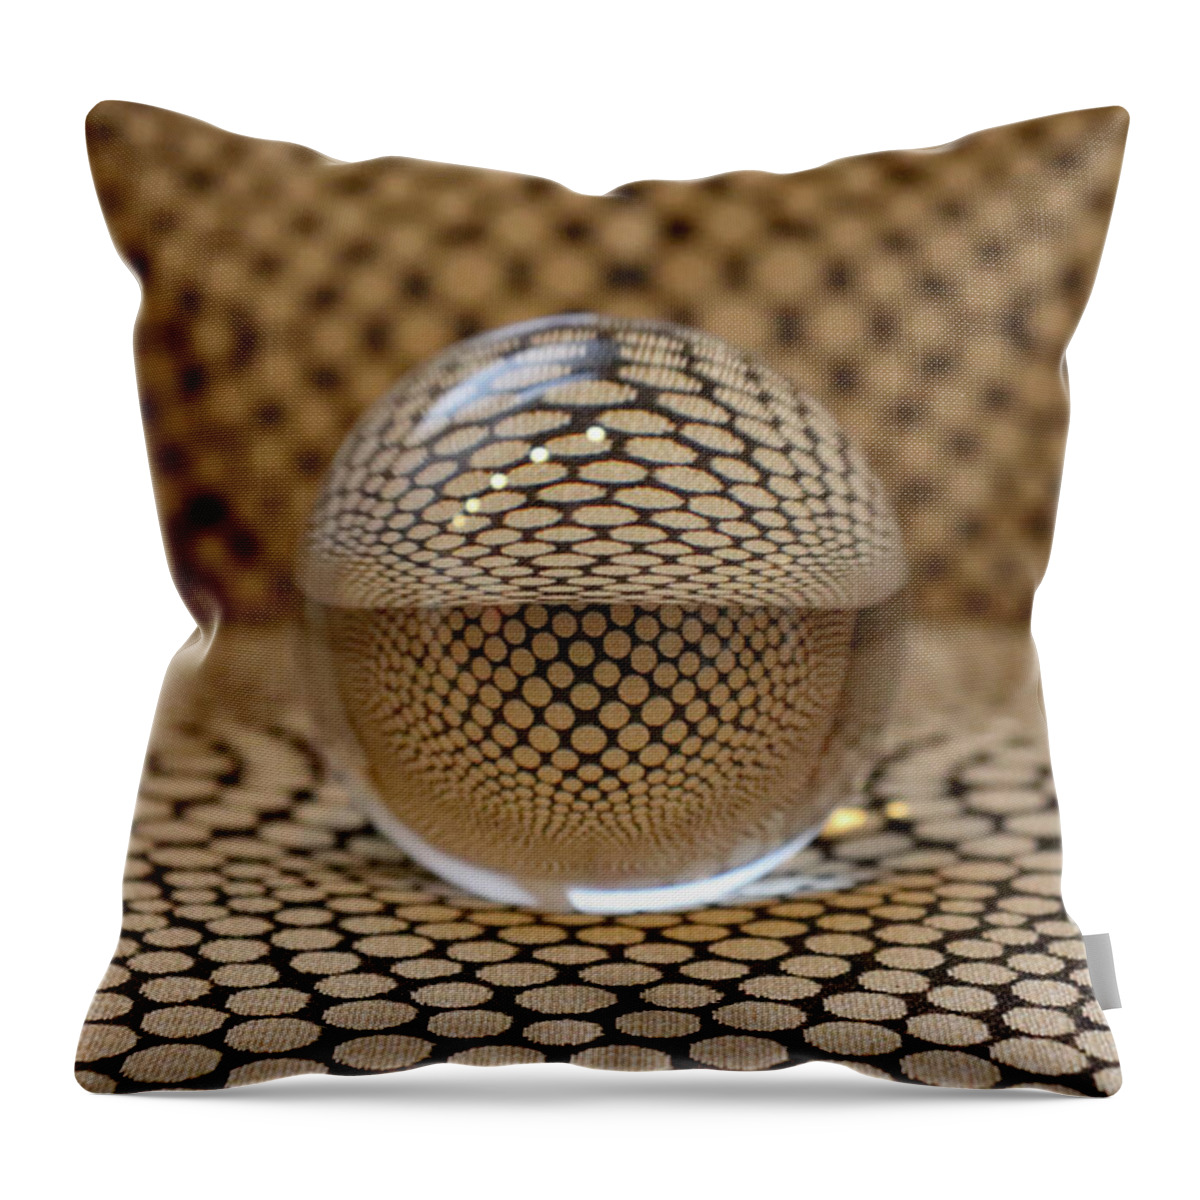 Lensball Throw Pillow featuring the photograph Lensball Chair Abstract by David T Wilkinson